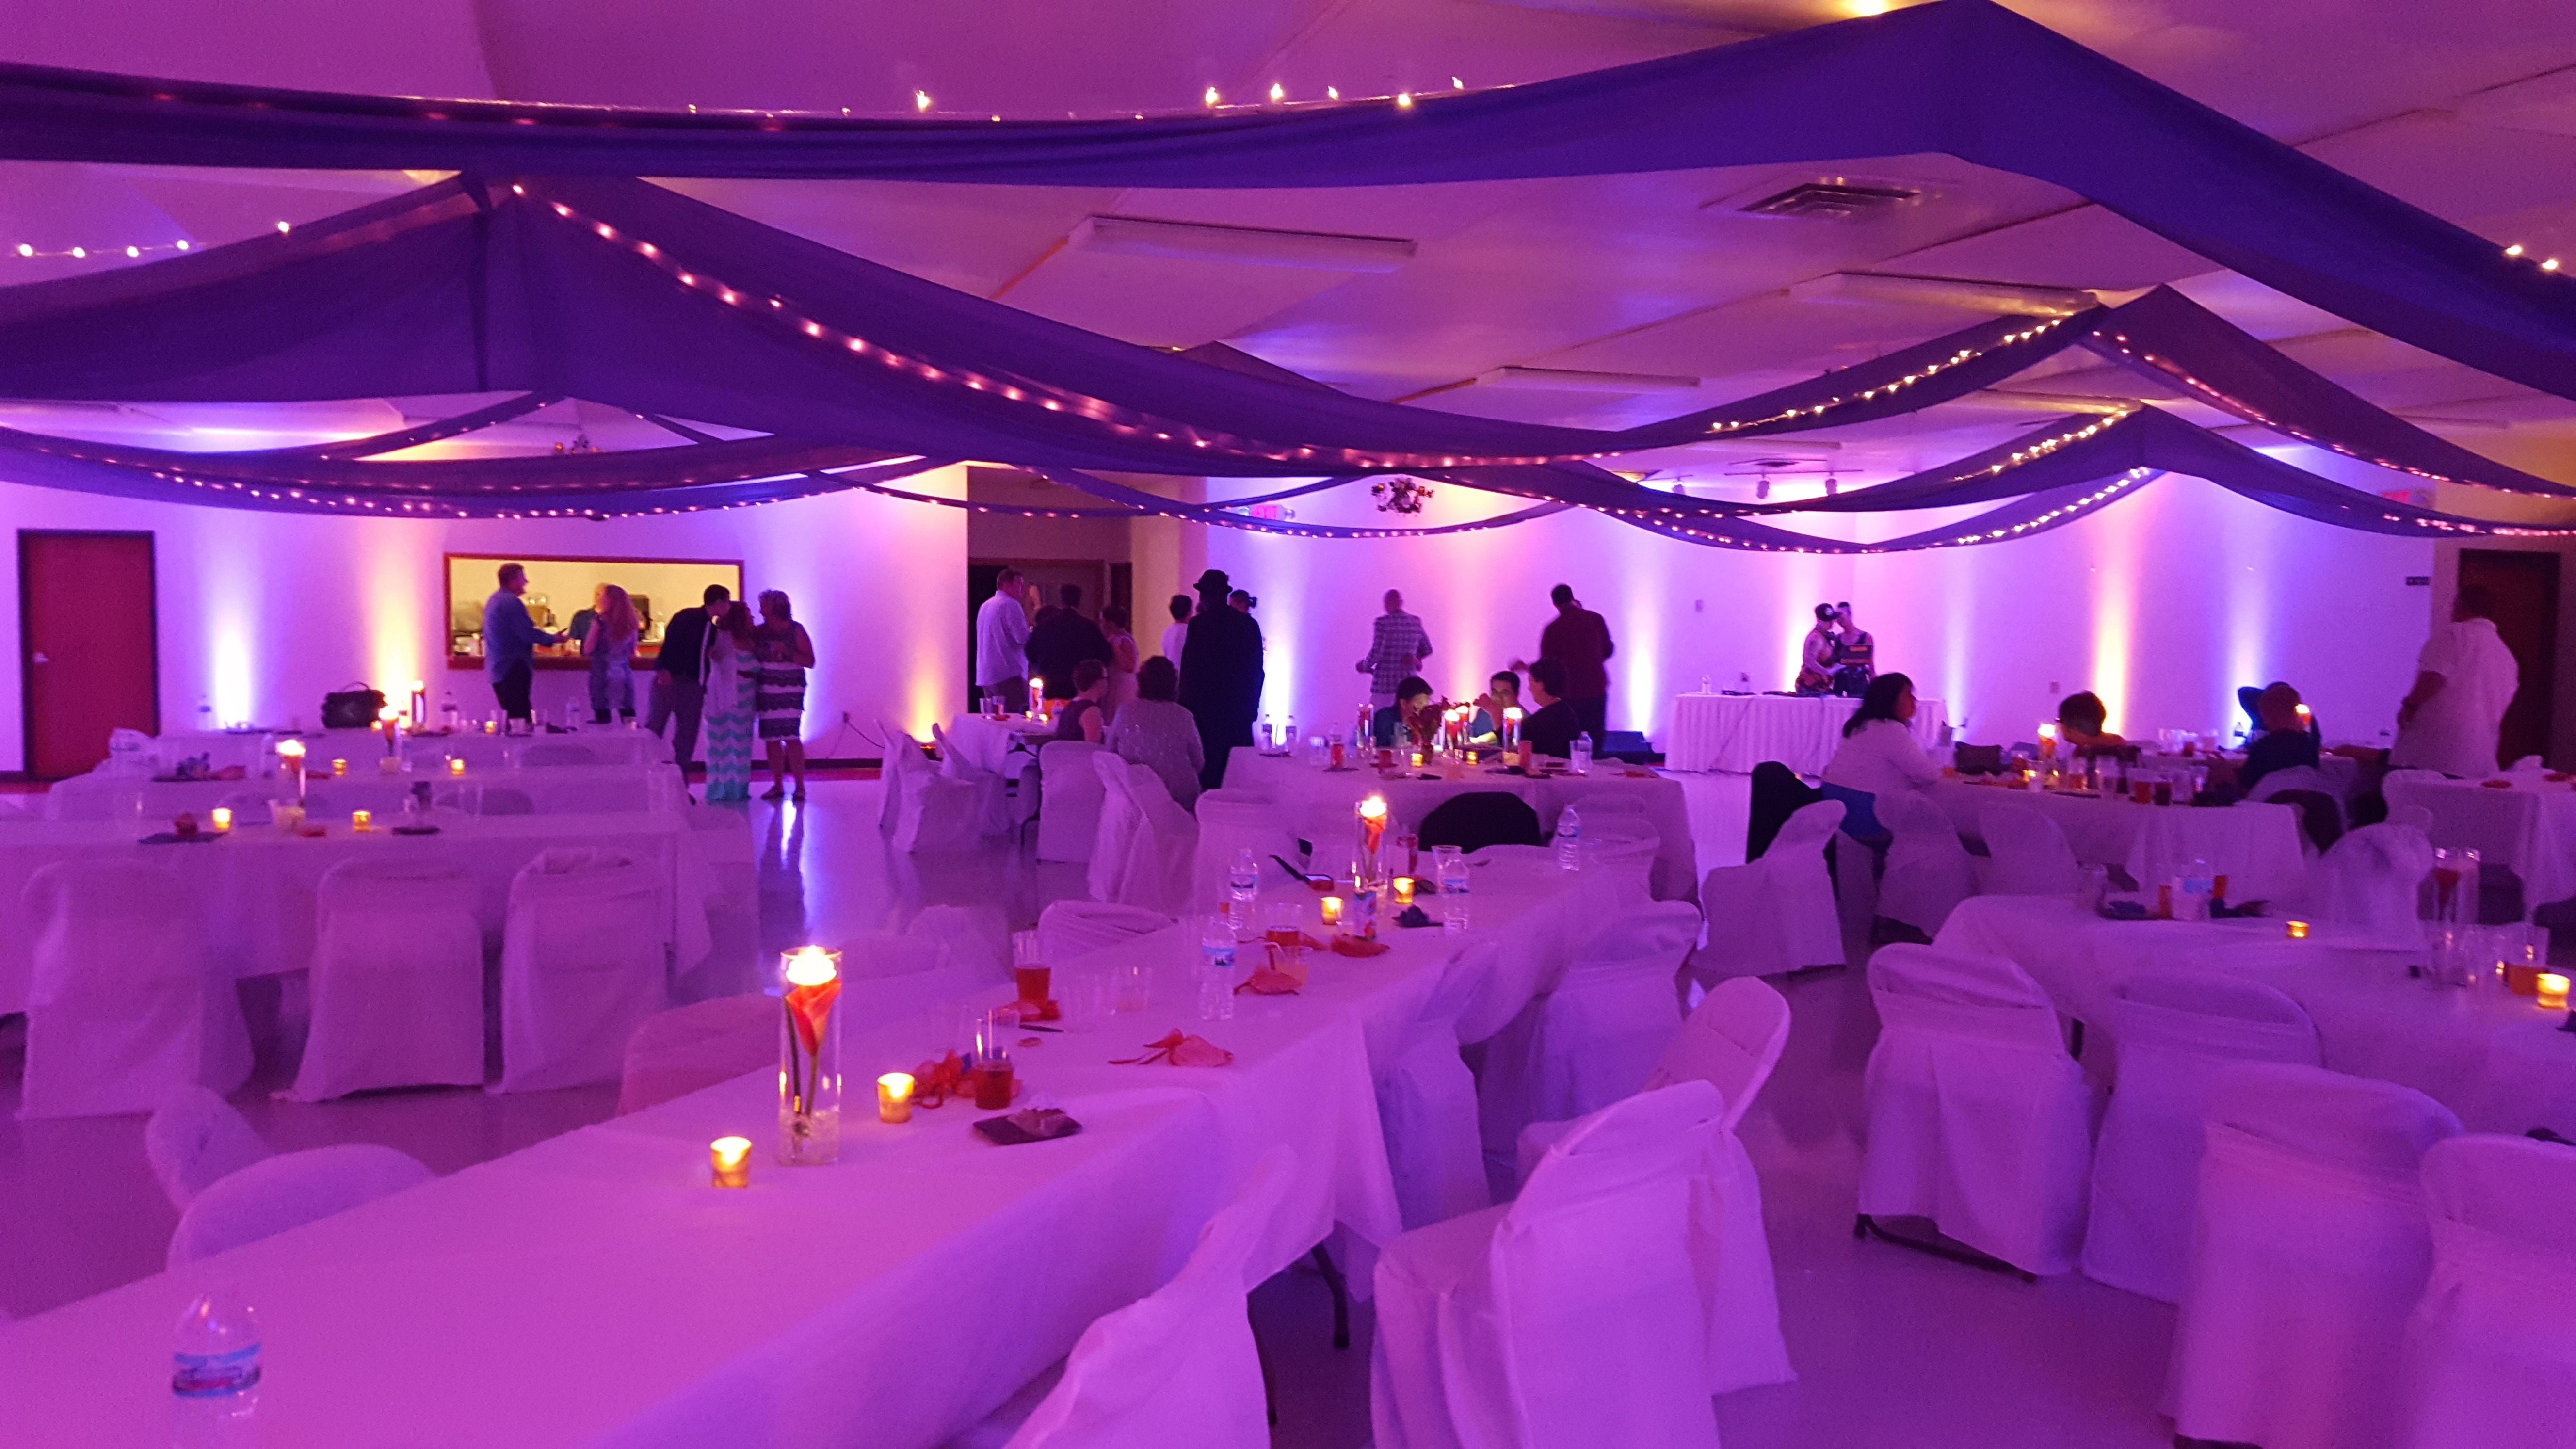 Billings Park wedding lighting with purple and orange up lighting by Duluth Event Lighting.